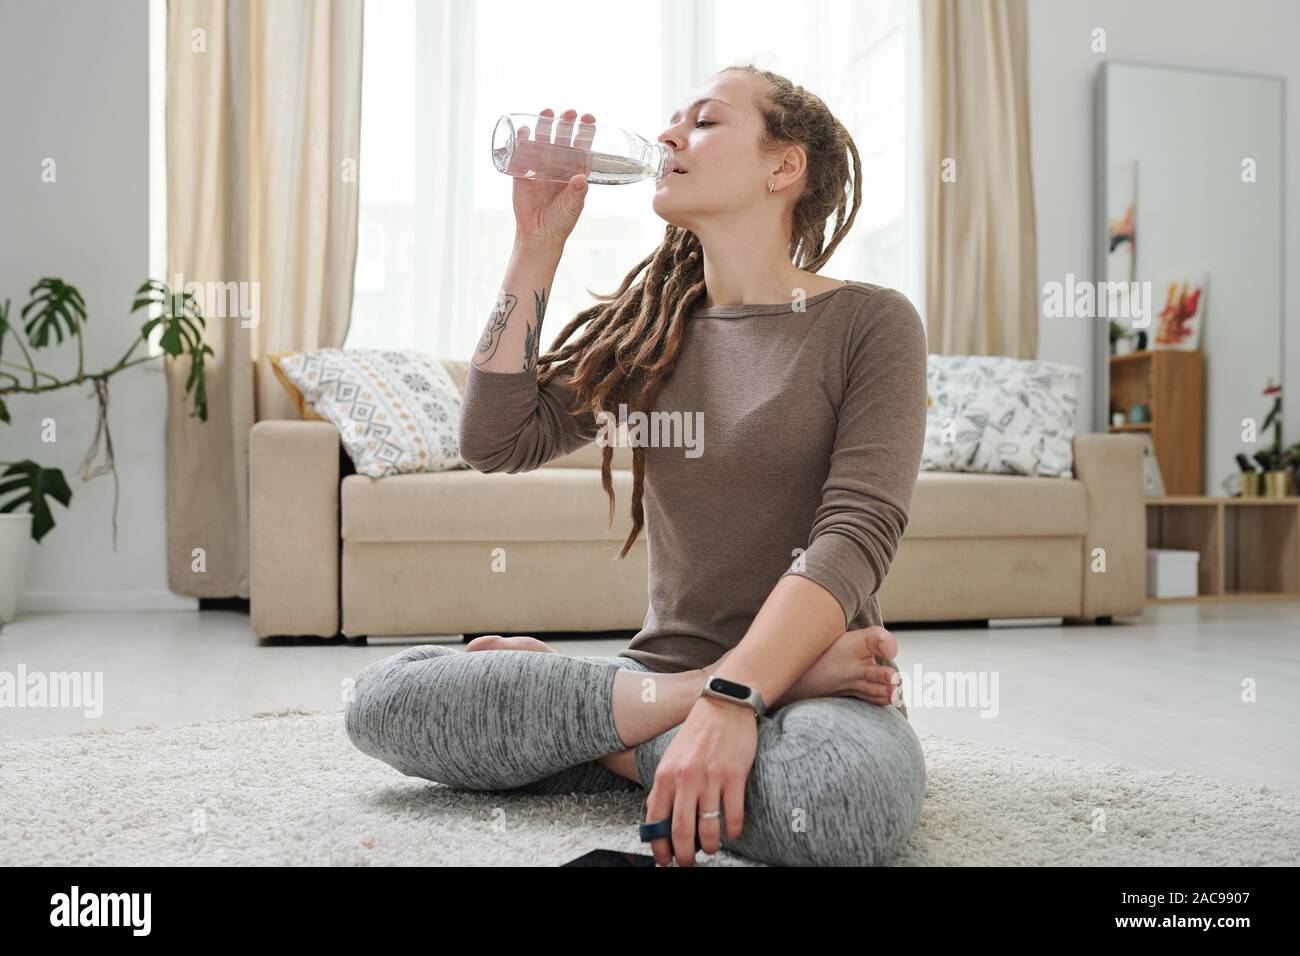 Thirsty young woman drinking water from bottle after workout at home Stock Photo